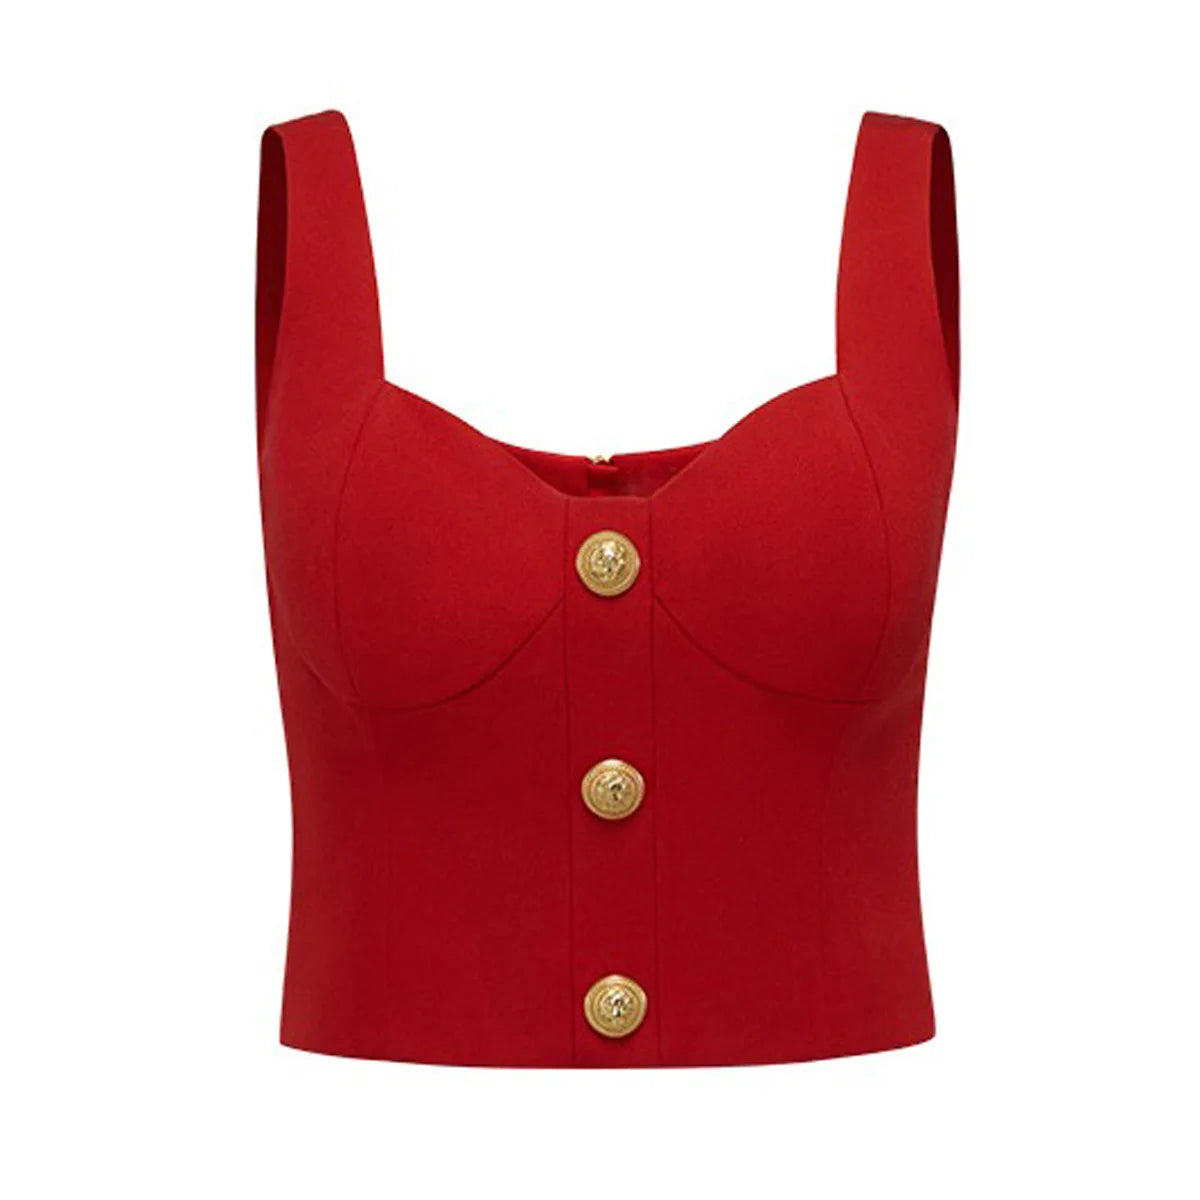 a woman wearing a red top with buttons